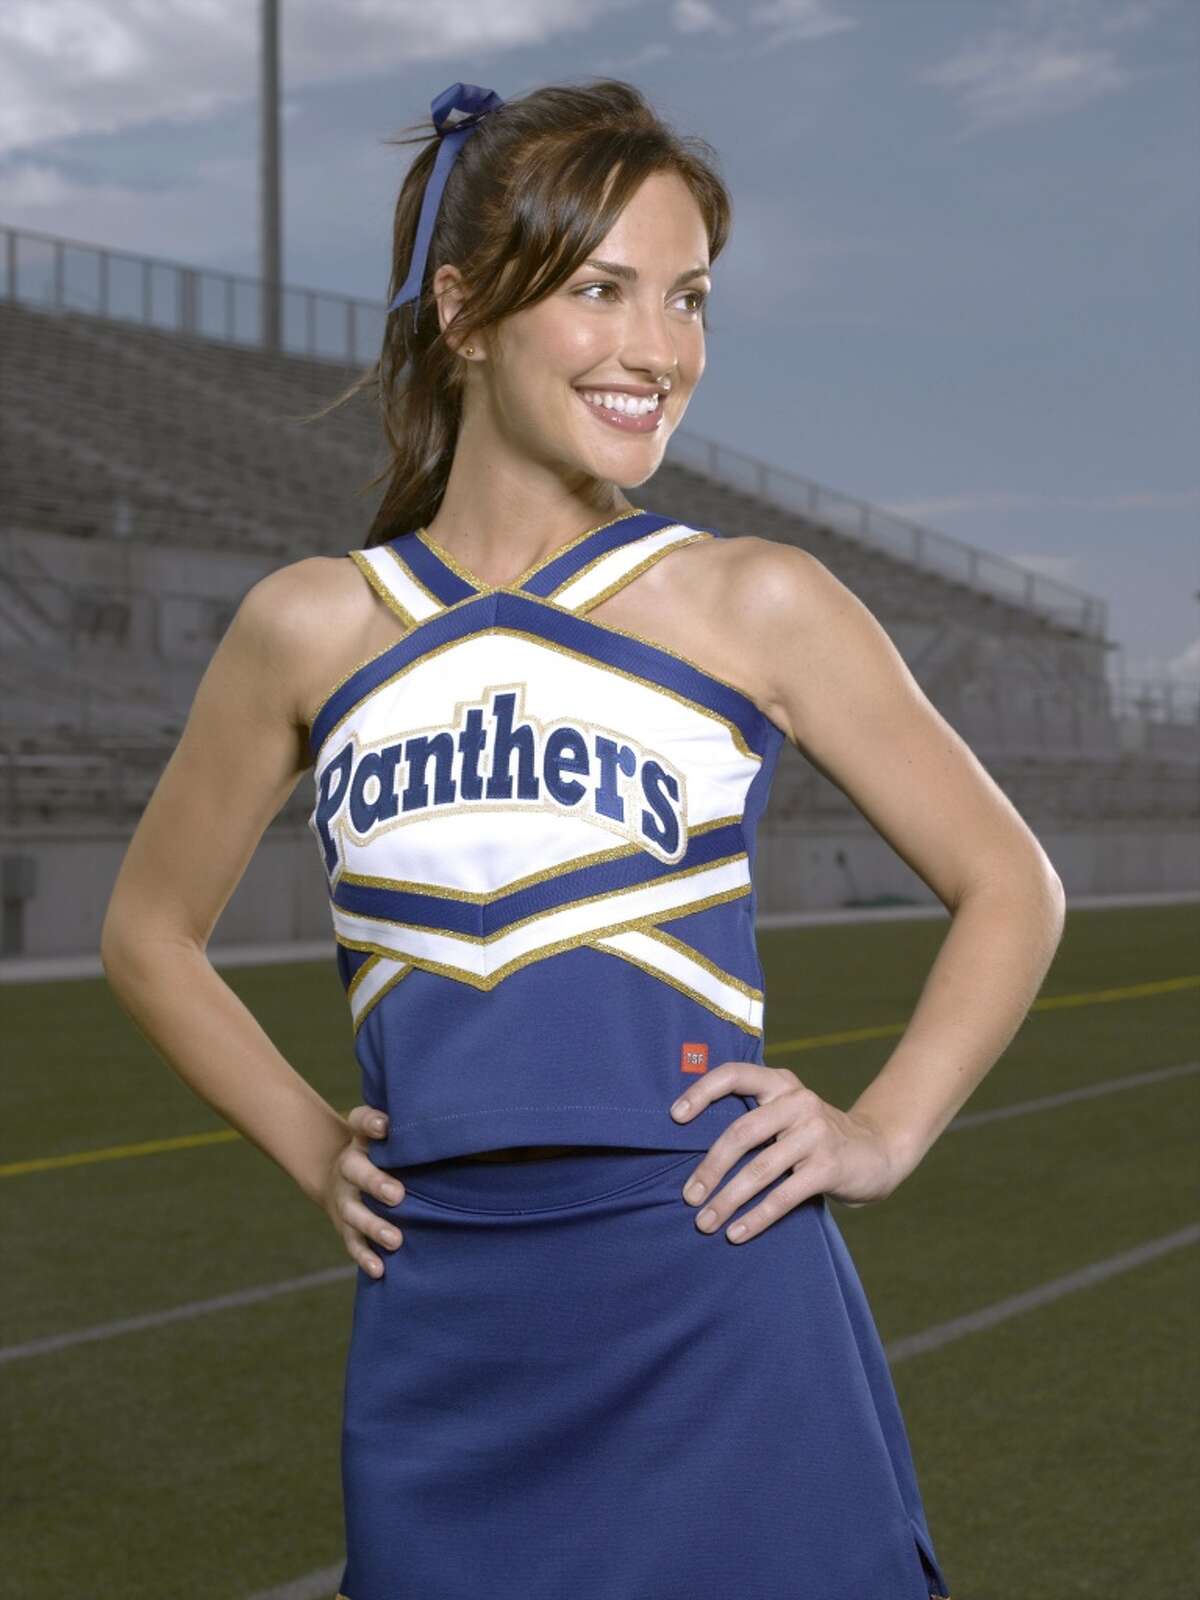 ''Friday Night Lights'' debuted in 2006, inspired by a non-fiction book and a 2004 film based on it. (Pictured is Minka Kelly).